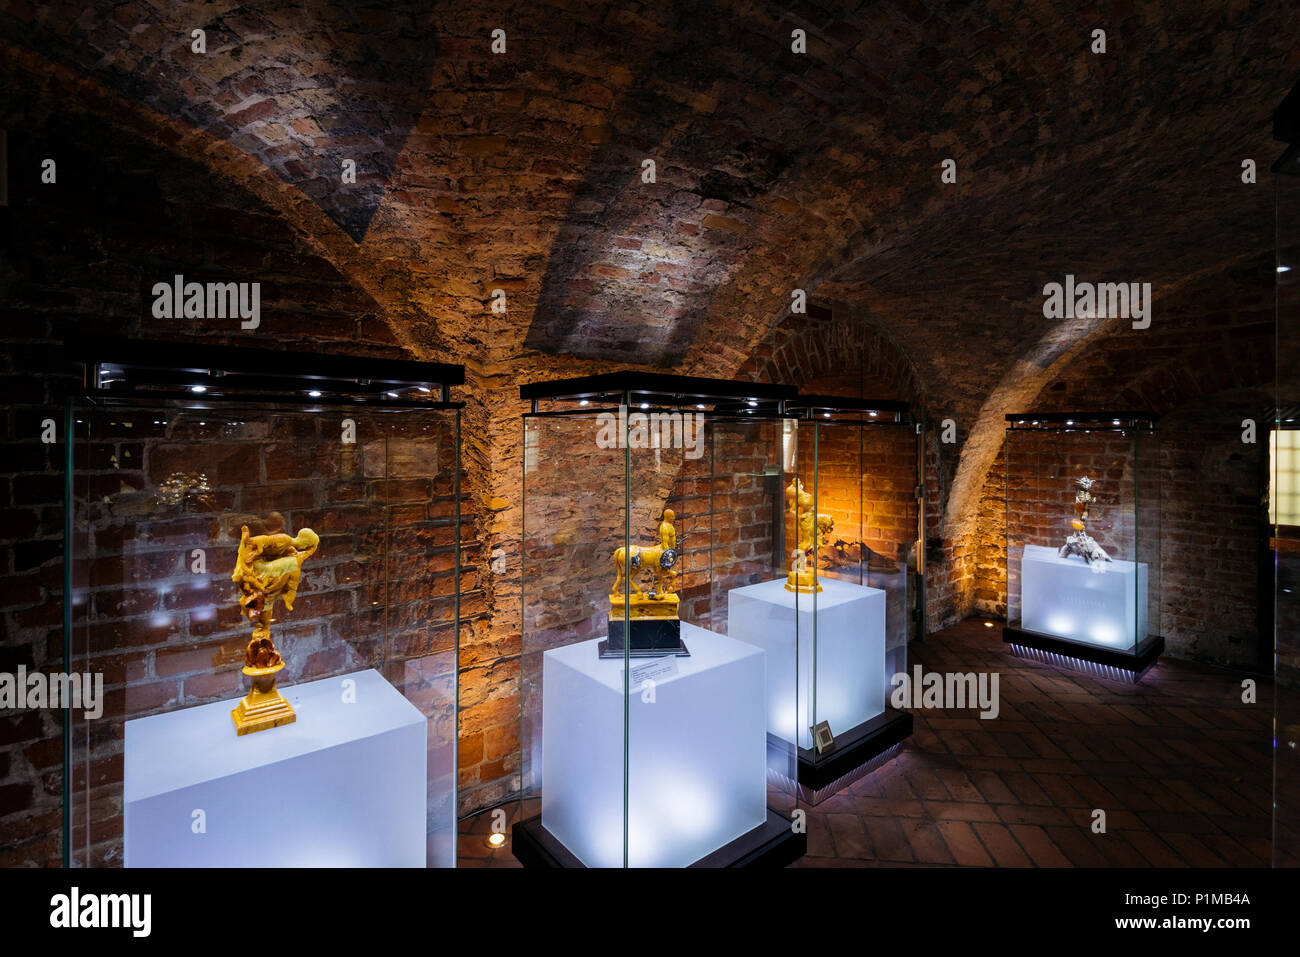 Amber Museum Gdansk Stock Photos & Amber Museum Gdansk Stock Images - Alamy